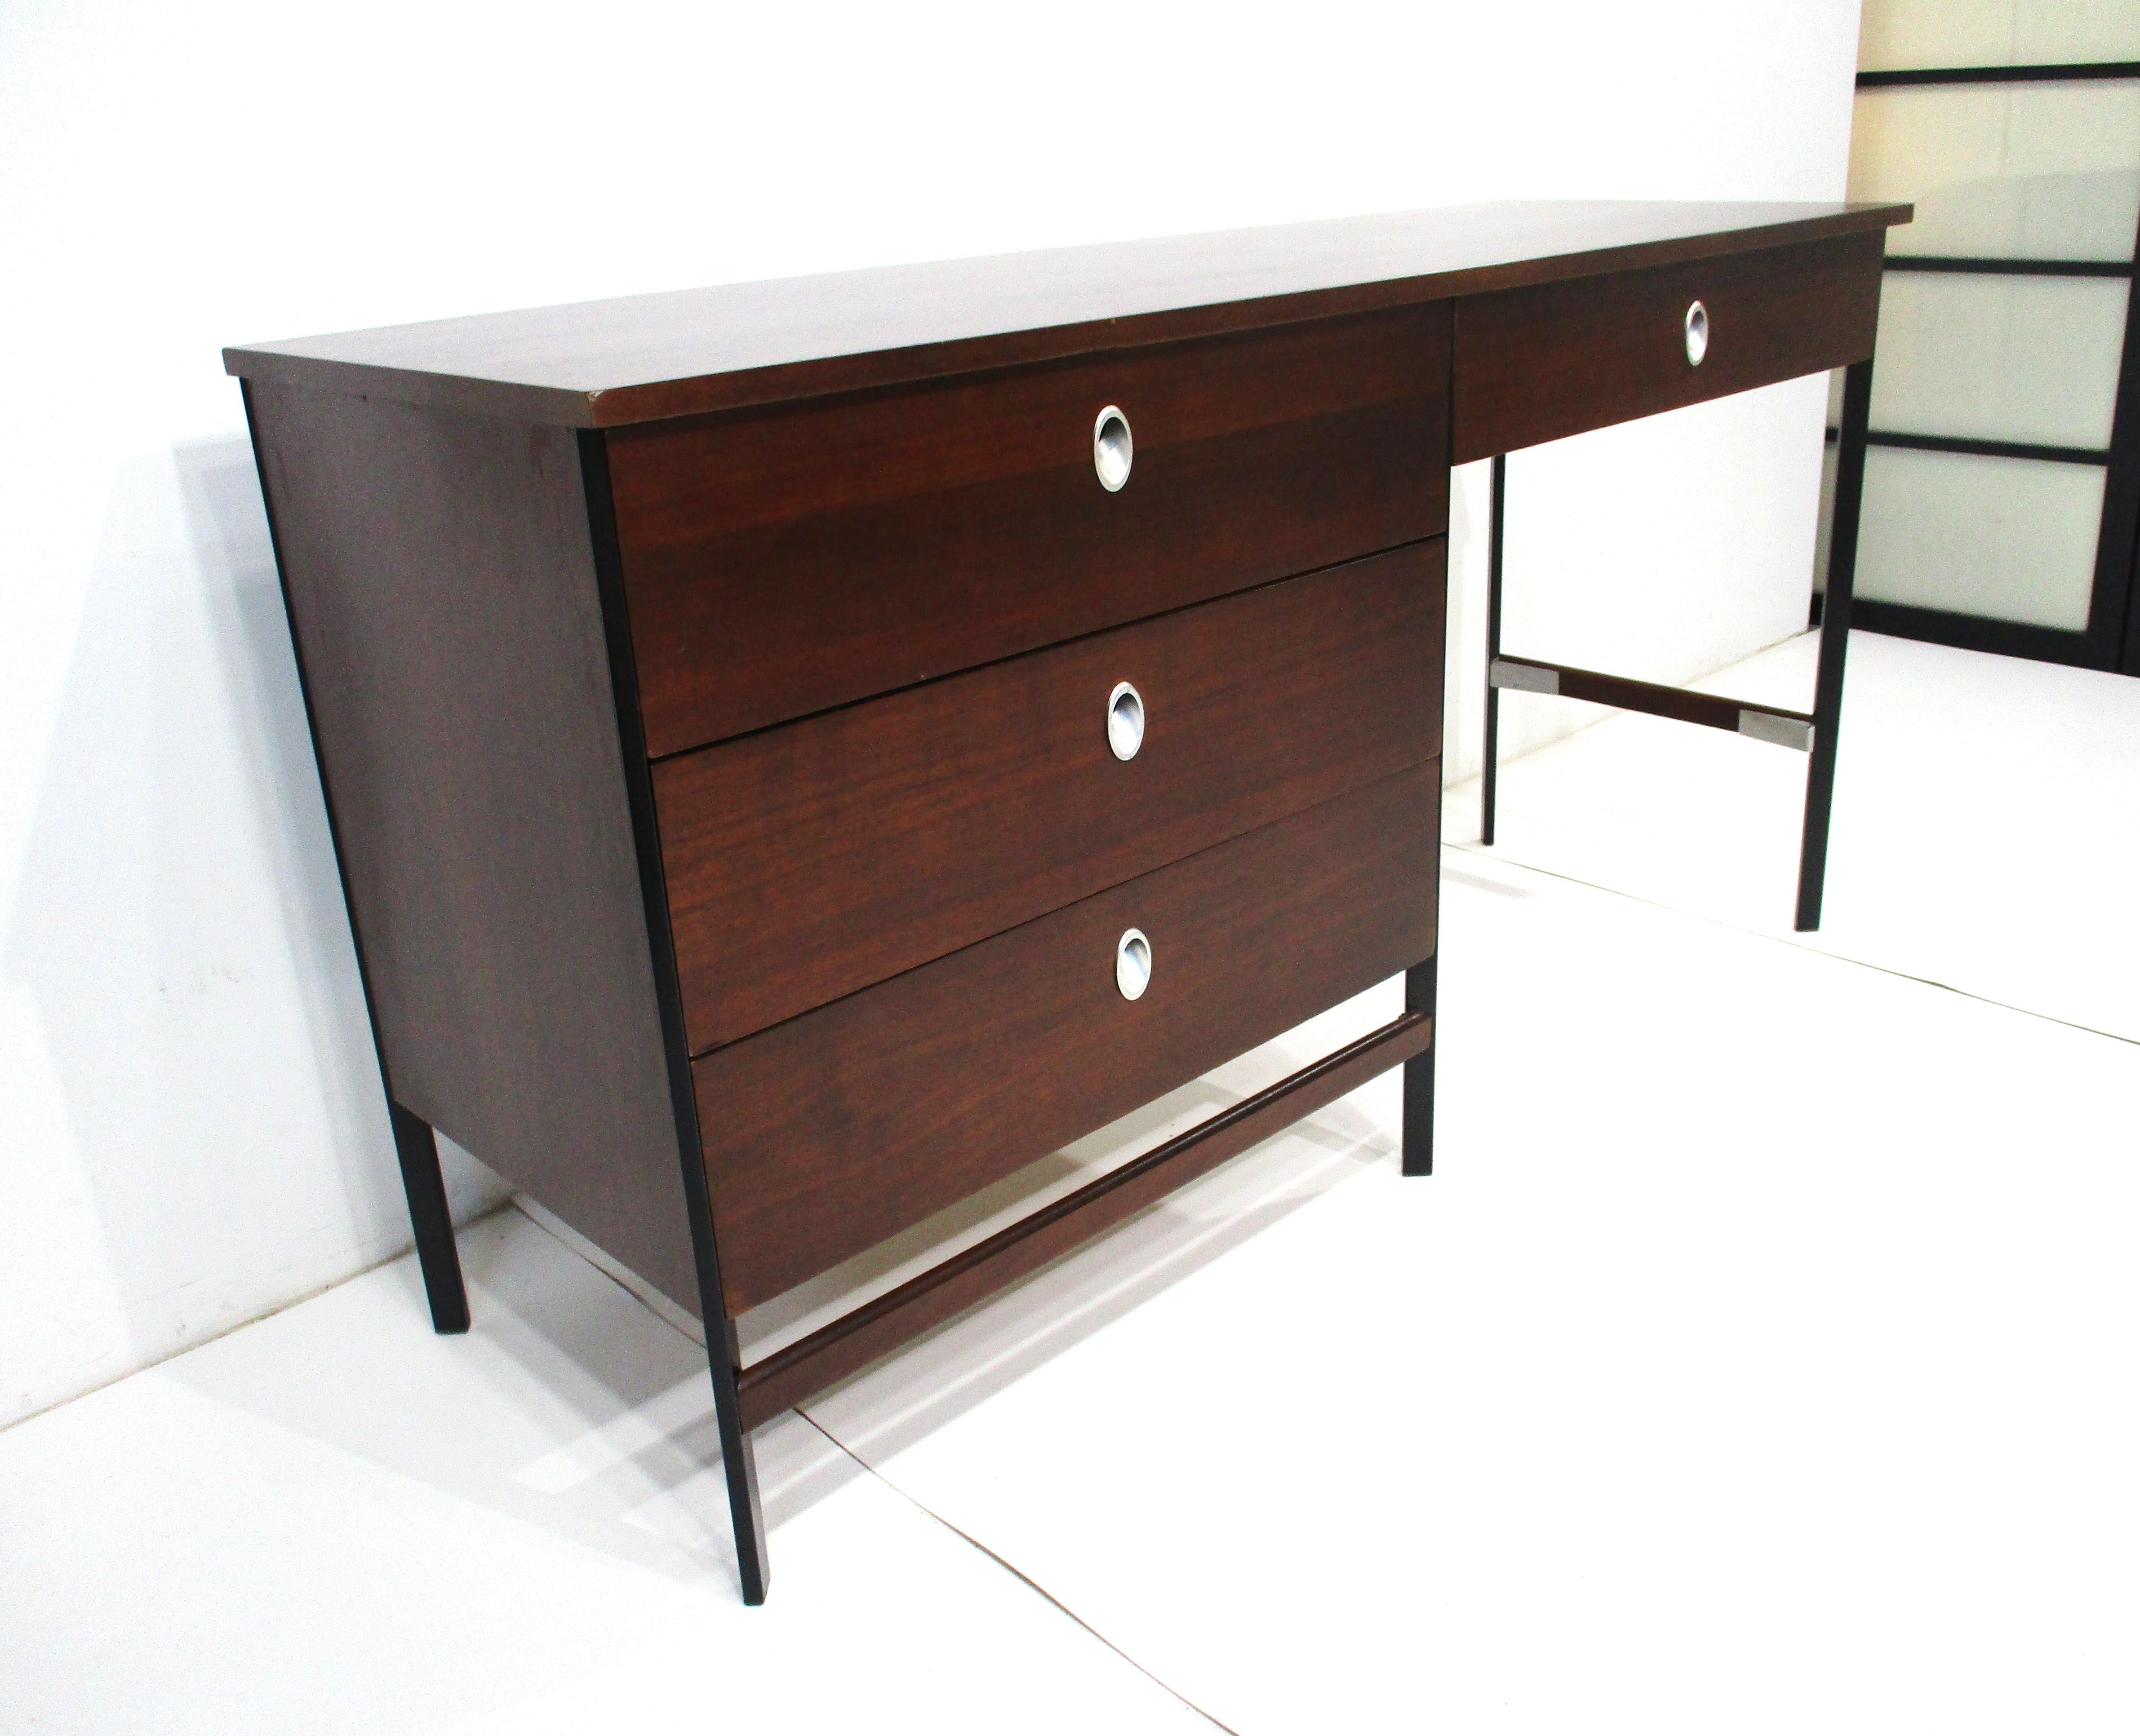 A dark walnut desk with three full sized side drawers and a smaller drawer in front of the chair area all with sculptural brushed aluminum pulls . The satin black frame gives the piece a rich modern look which after 60 years is still fresh .